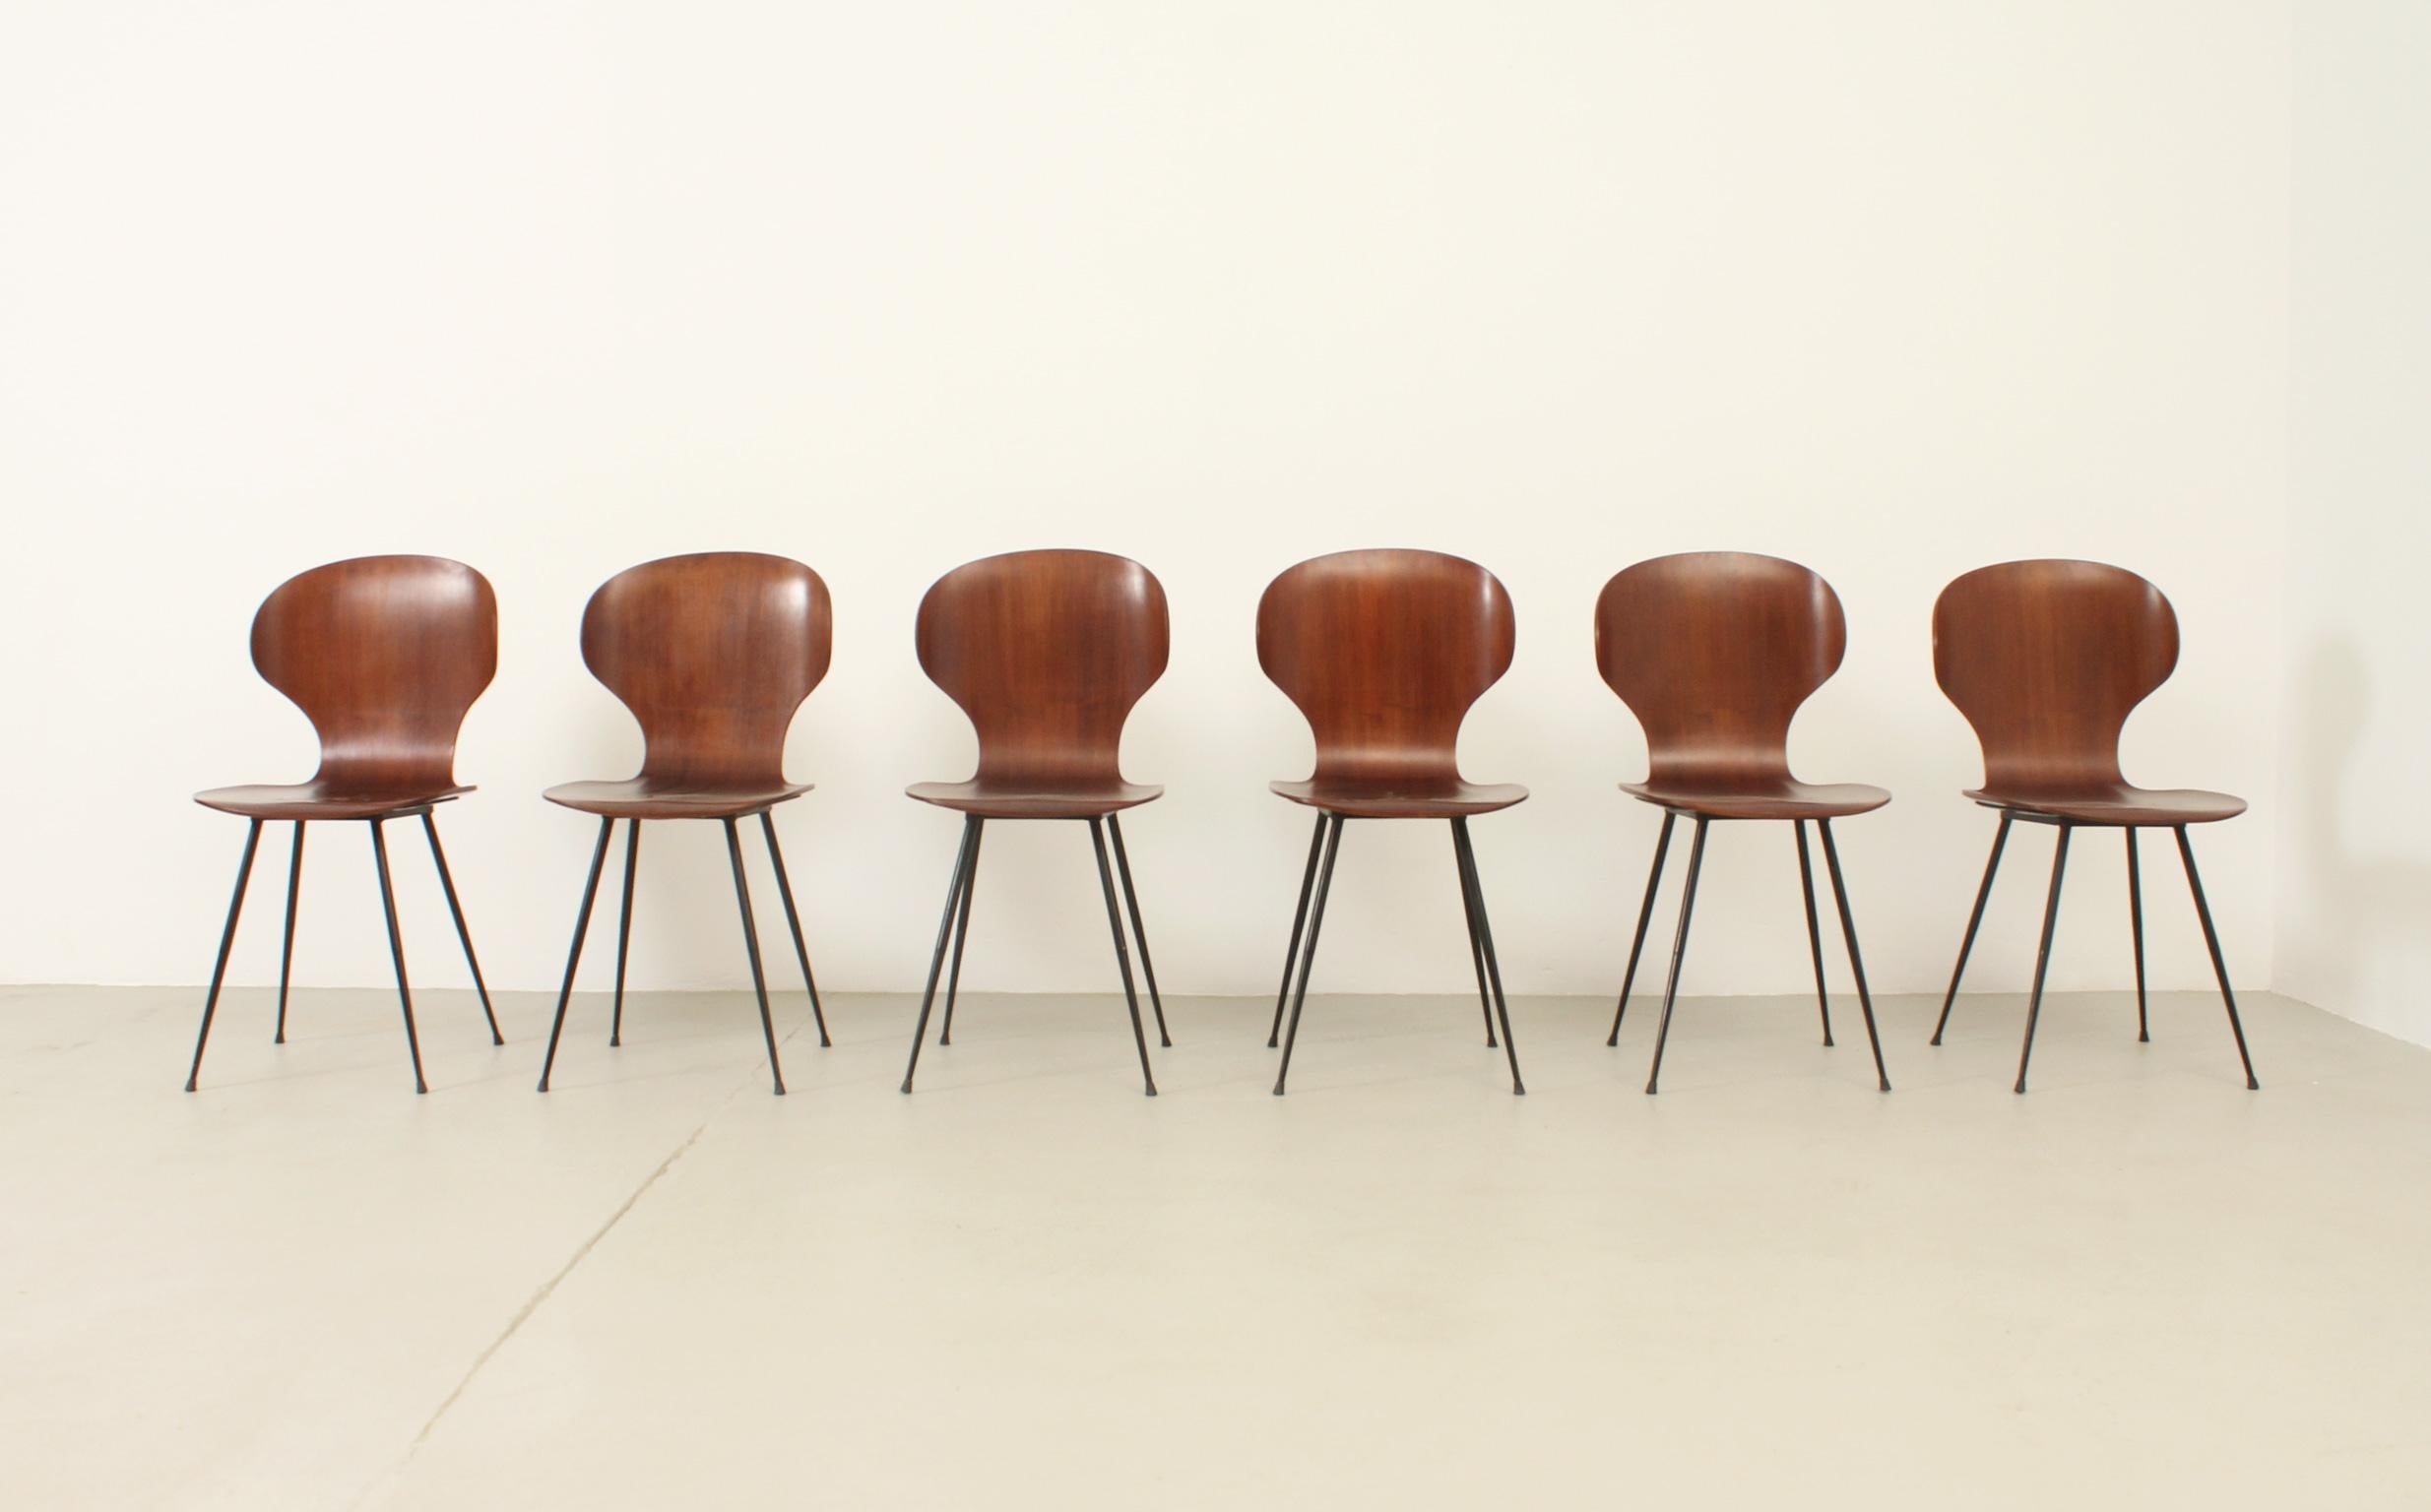 Italian Set of Six Plywood Side Chairs by Carlo Ratti, Italy, 1950's For Sale